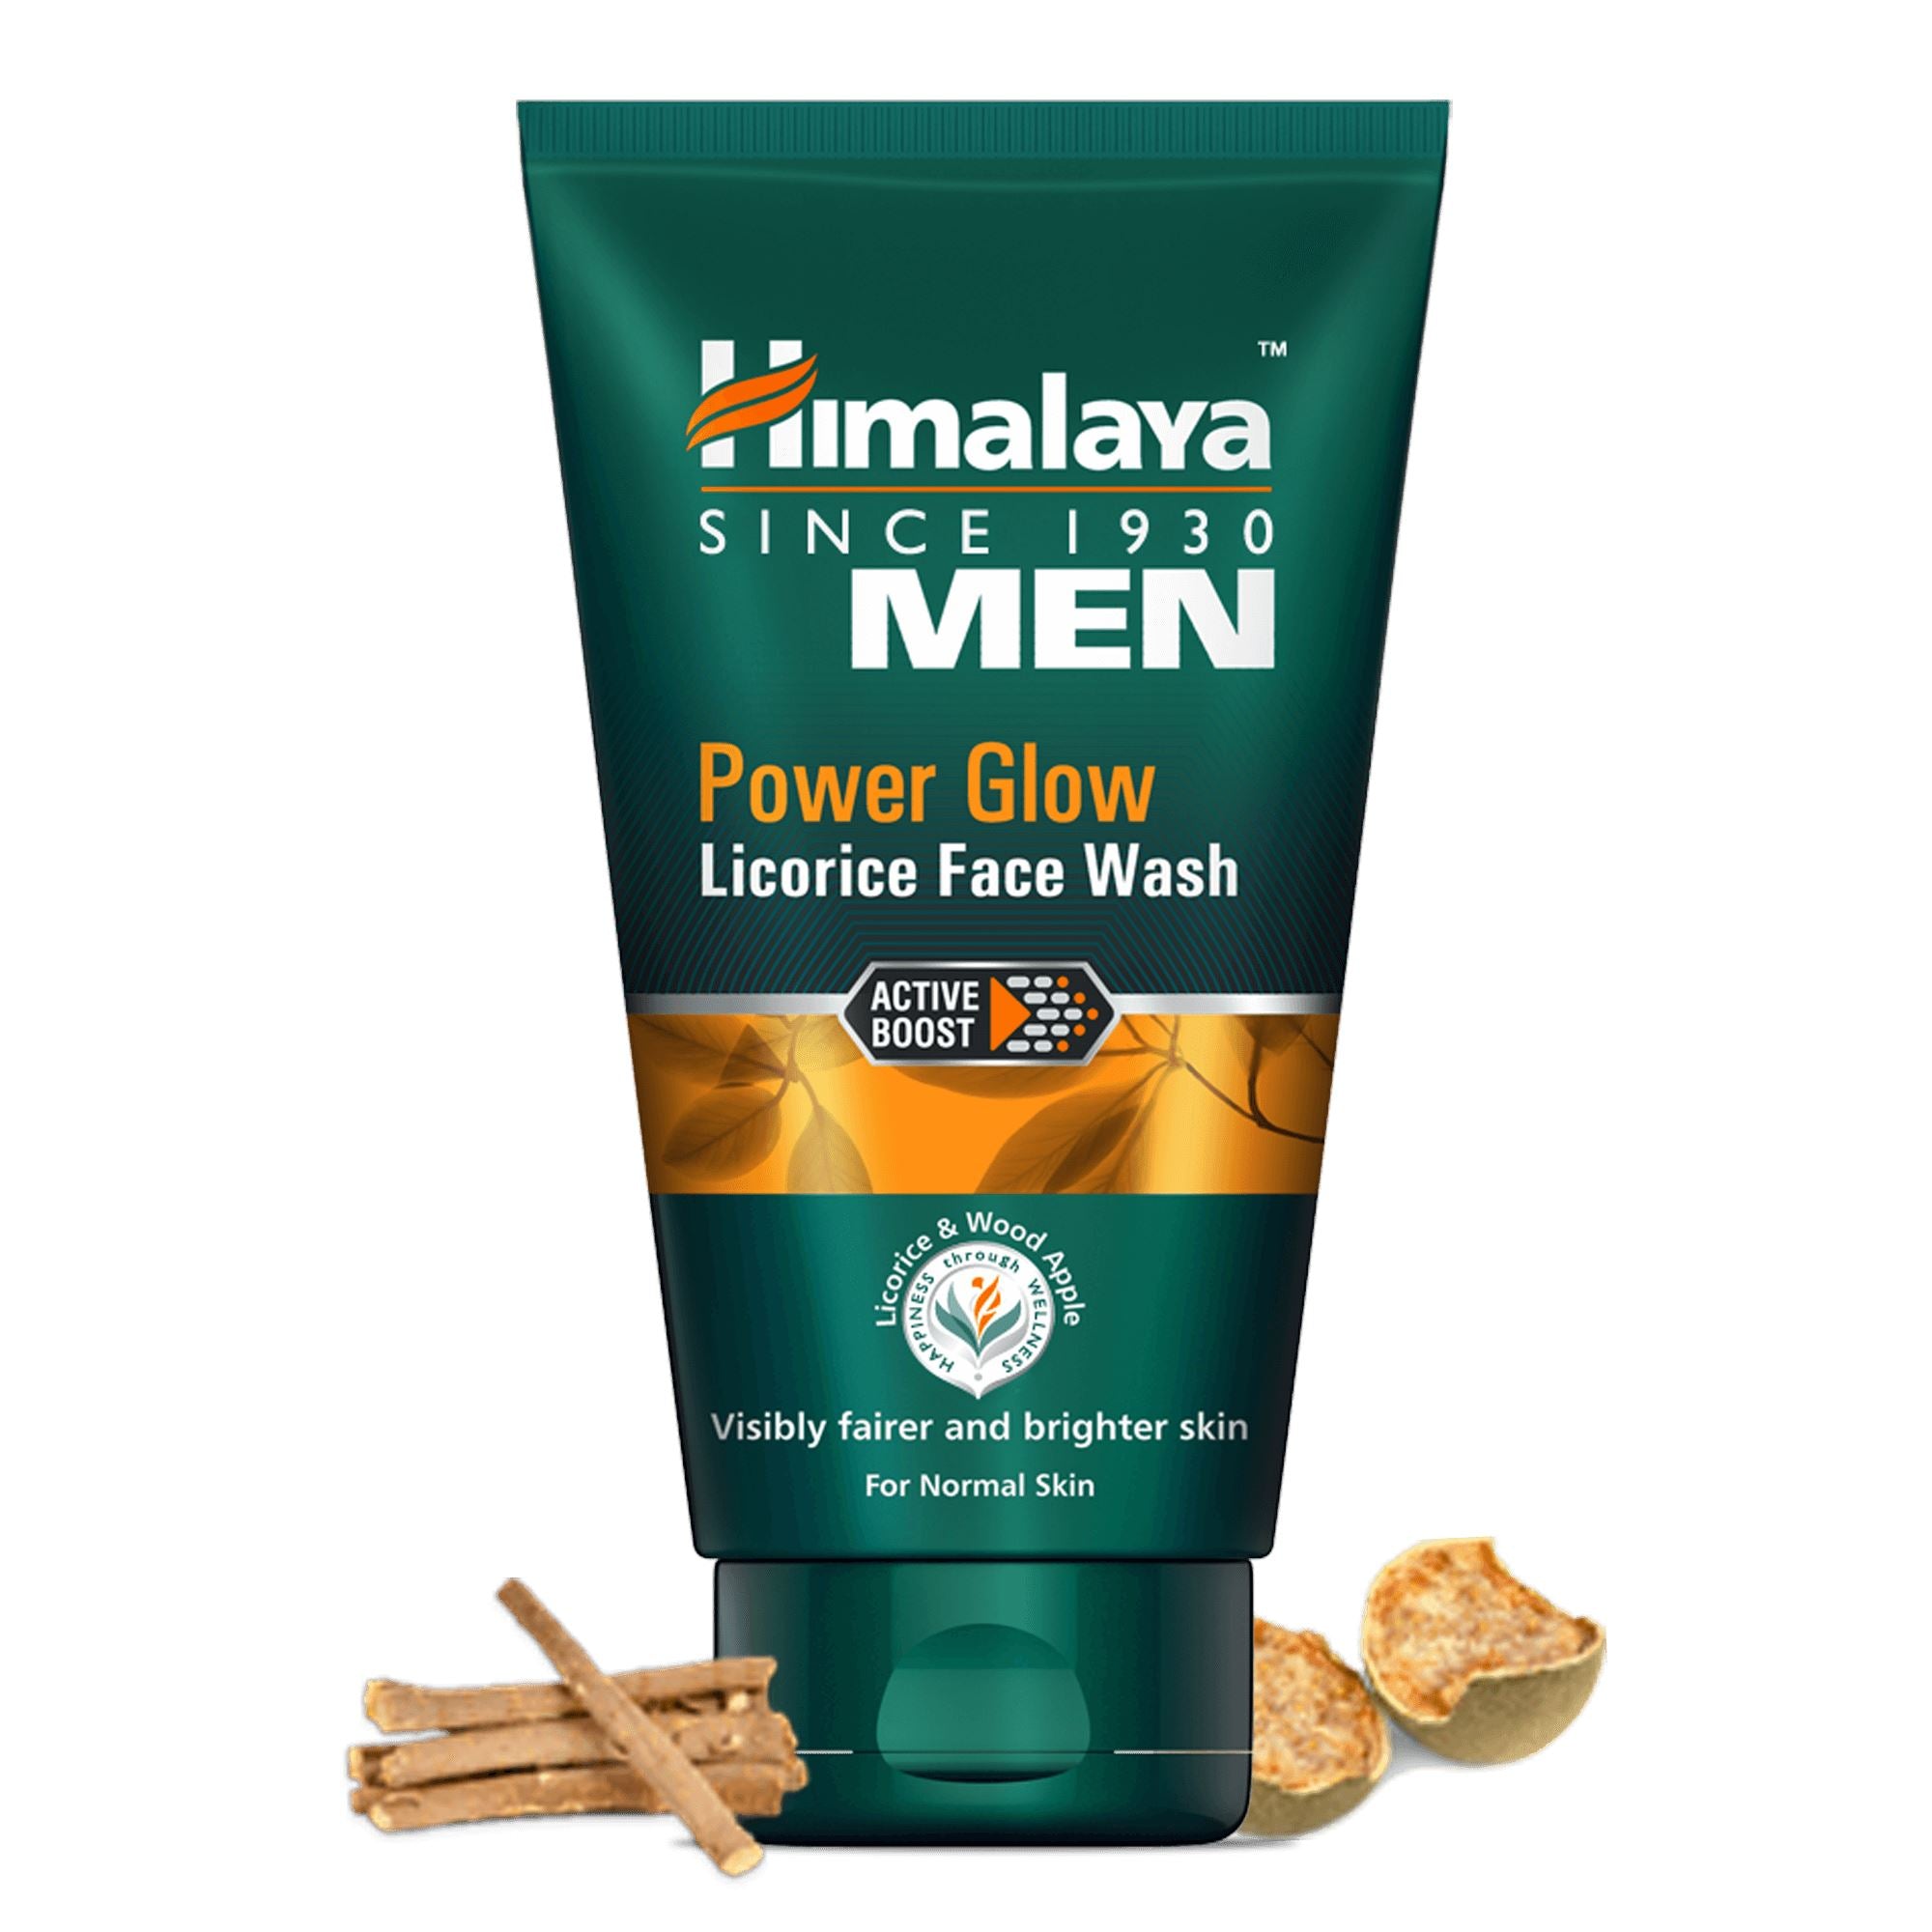 Himalaya MEN Power Glow Licorice Face Wash - For visibly fairer and brighter skin